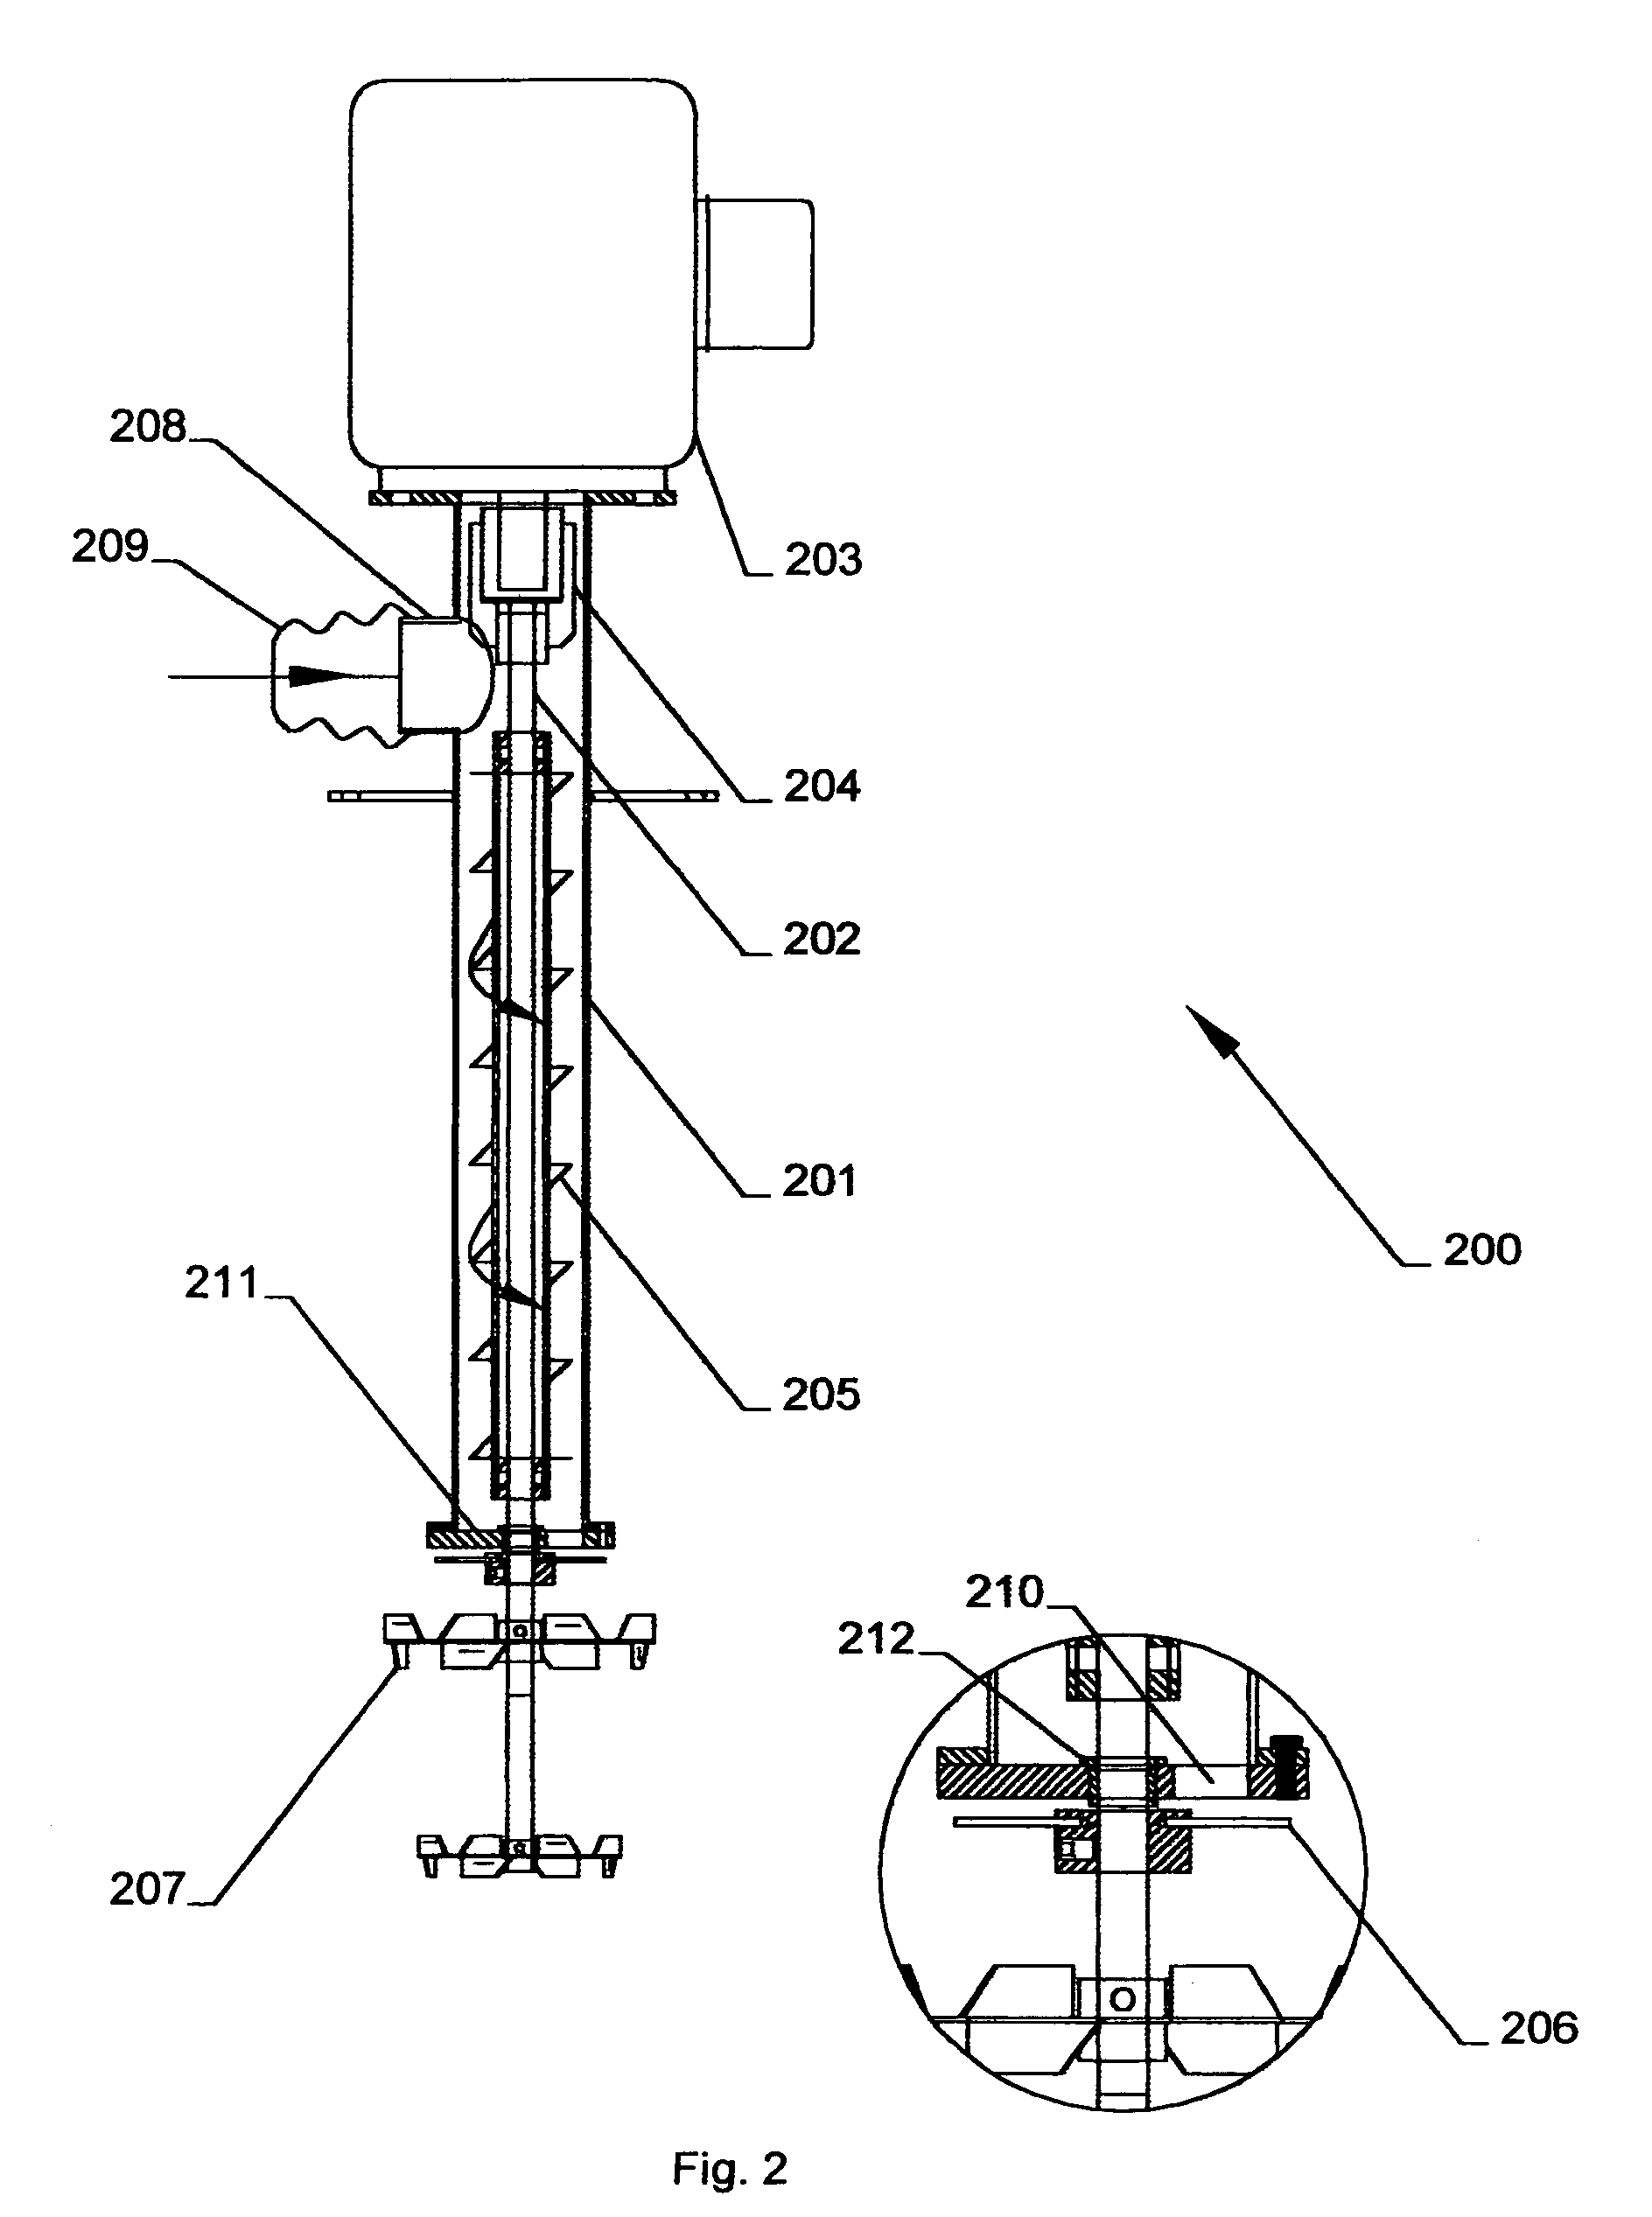 Control system and method for continuous mixing of slurry with removal of entrained bubbles